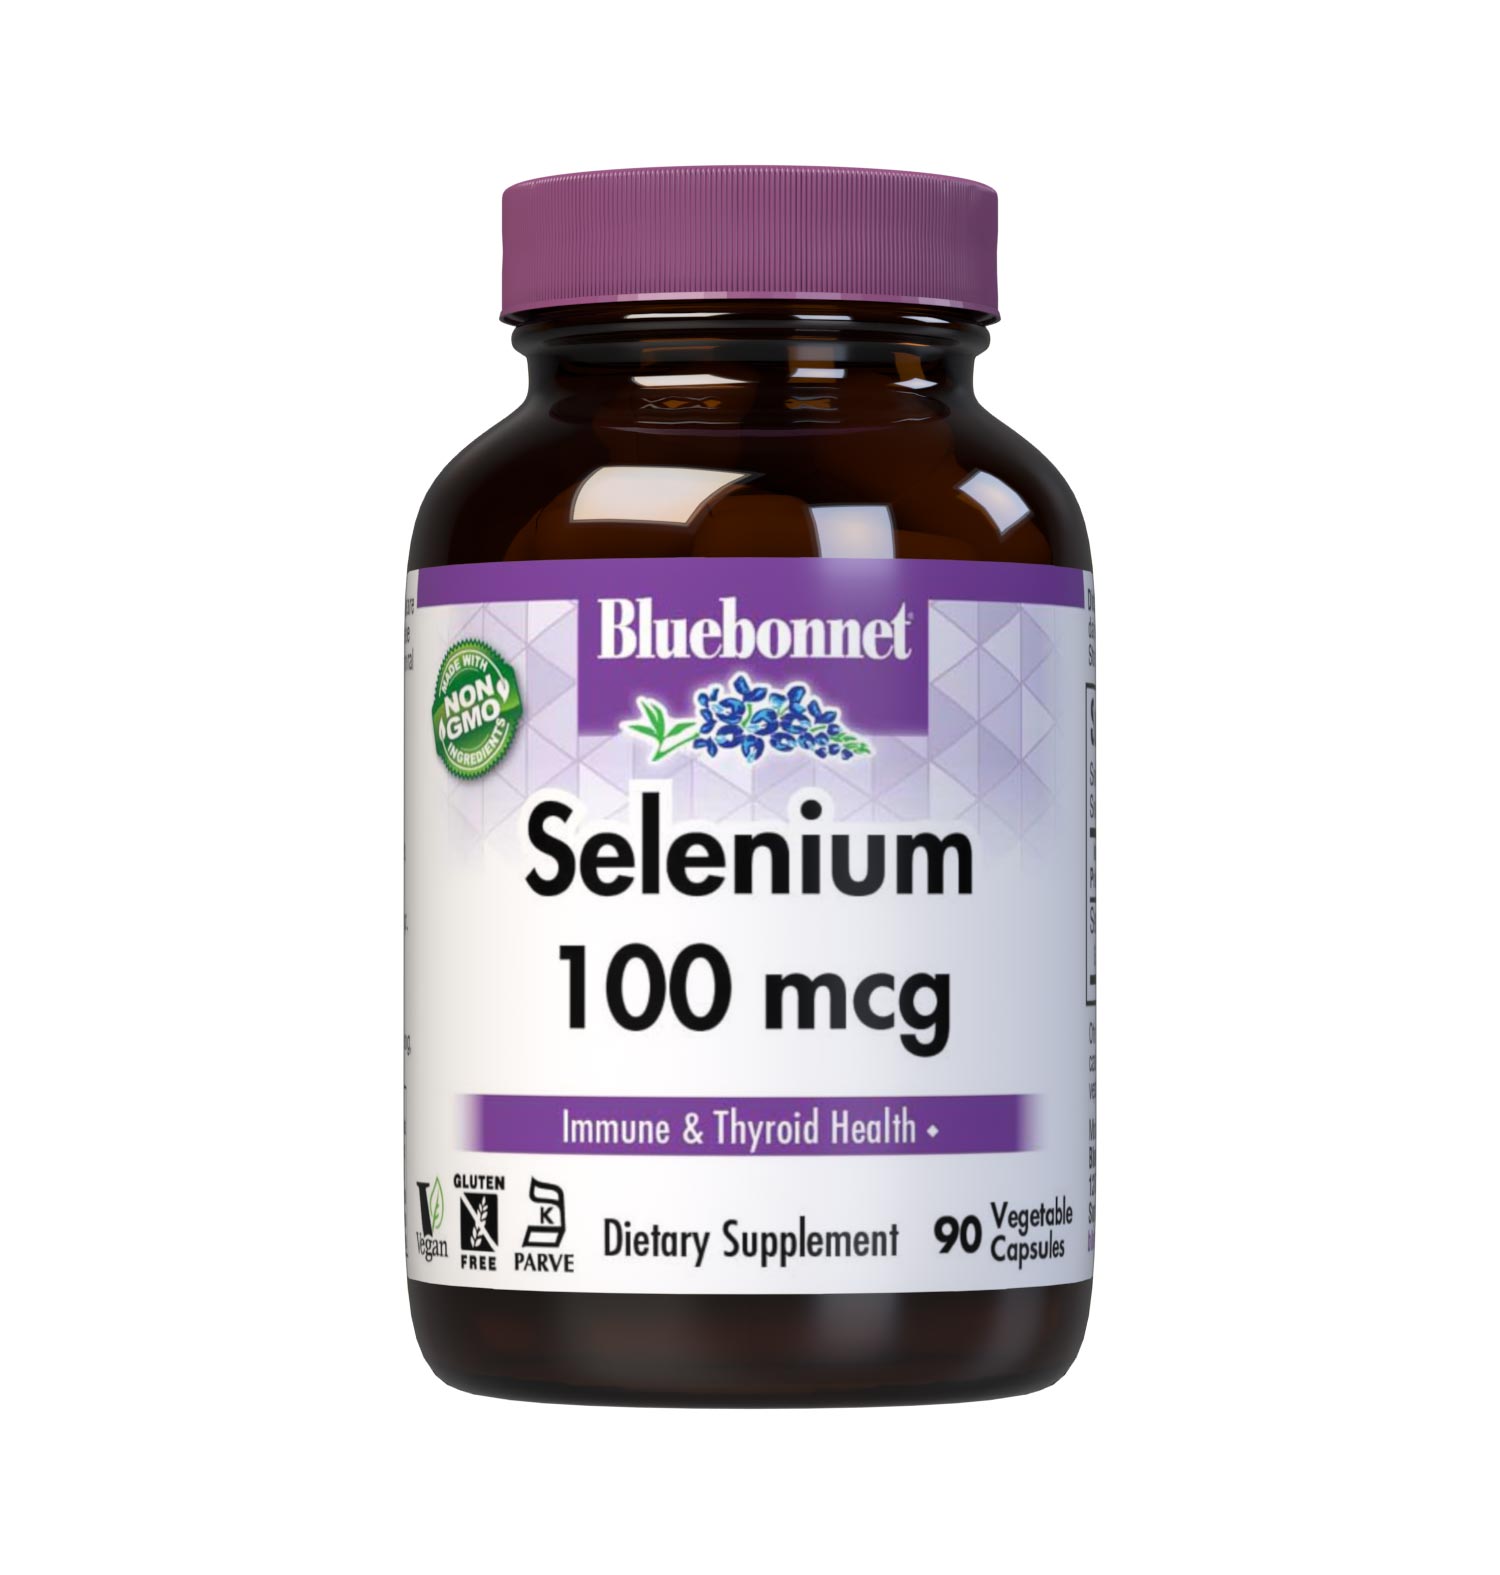 Bluebonnet's Selenium 100 mcg 90 Vegetable Capsules are formulated with selenomethionine, an amino acid chelate of selenium and L-methionine which may support immune and thyroid health. #size_90 count